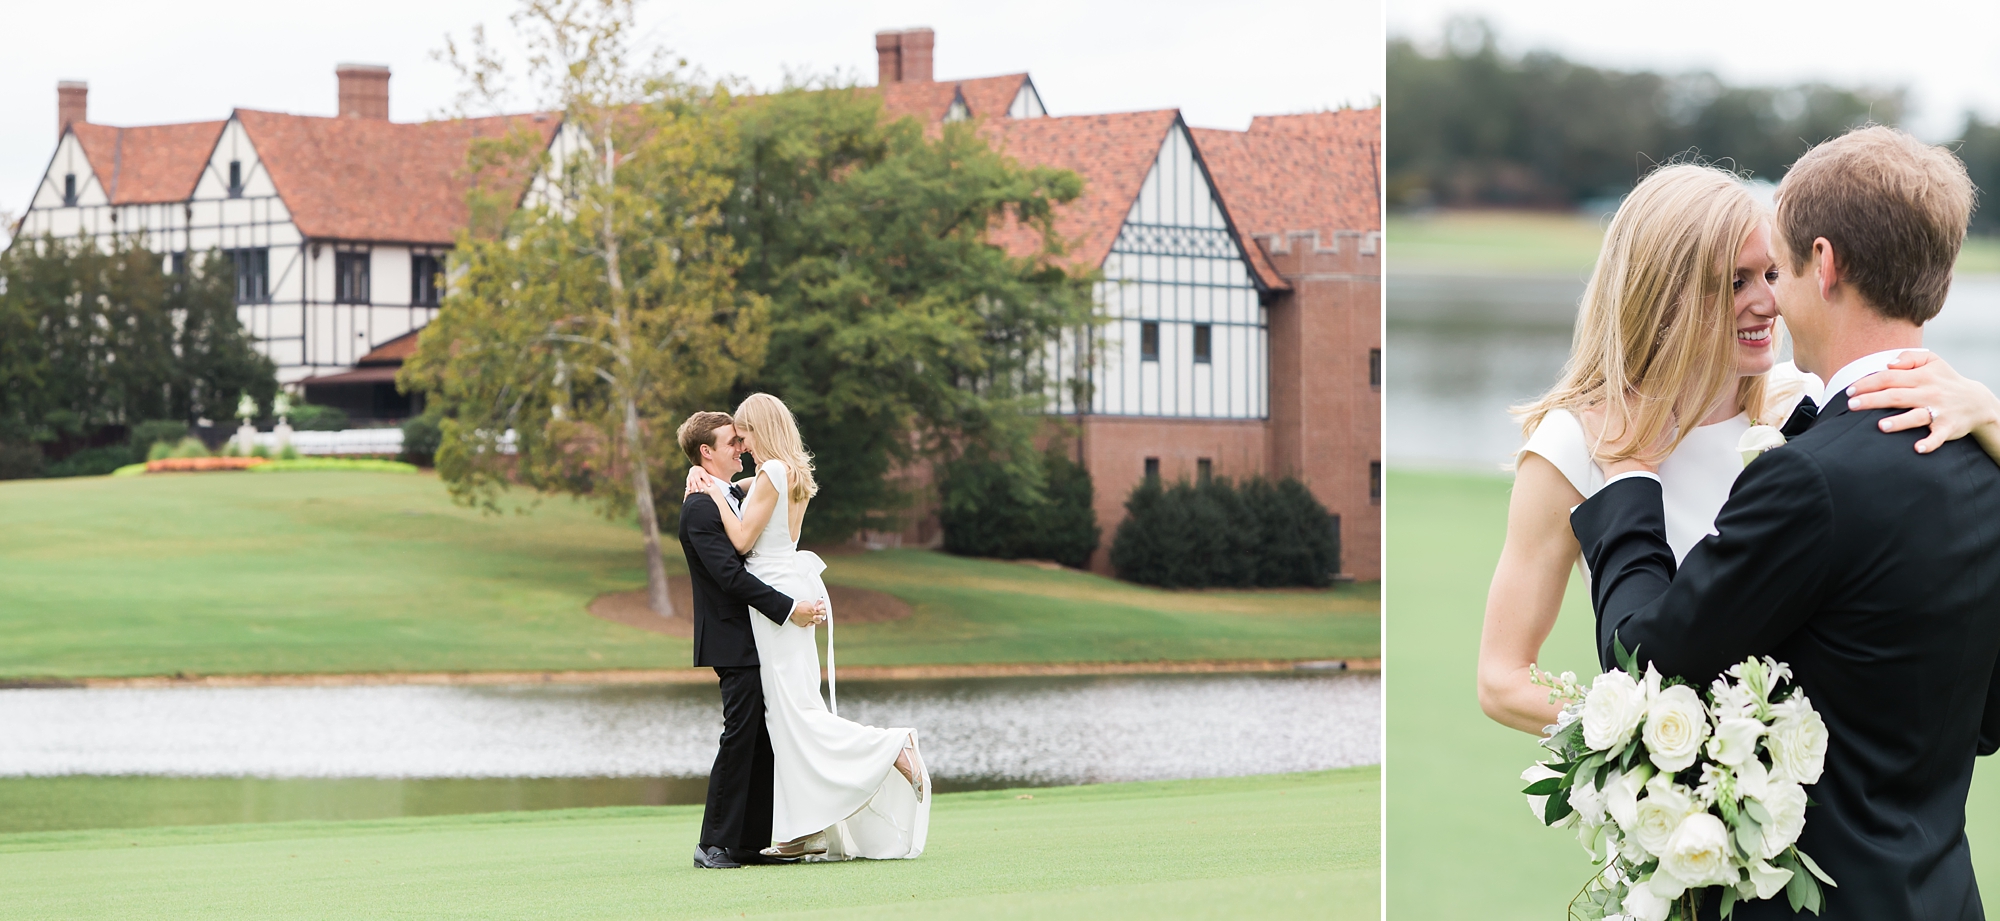 Bride and Groom Portraits at East Lake Golf Club by Top Atlanta Wedding Photographer Leigh Wolfe Photography 